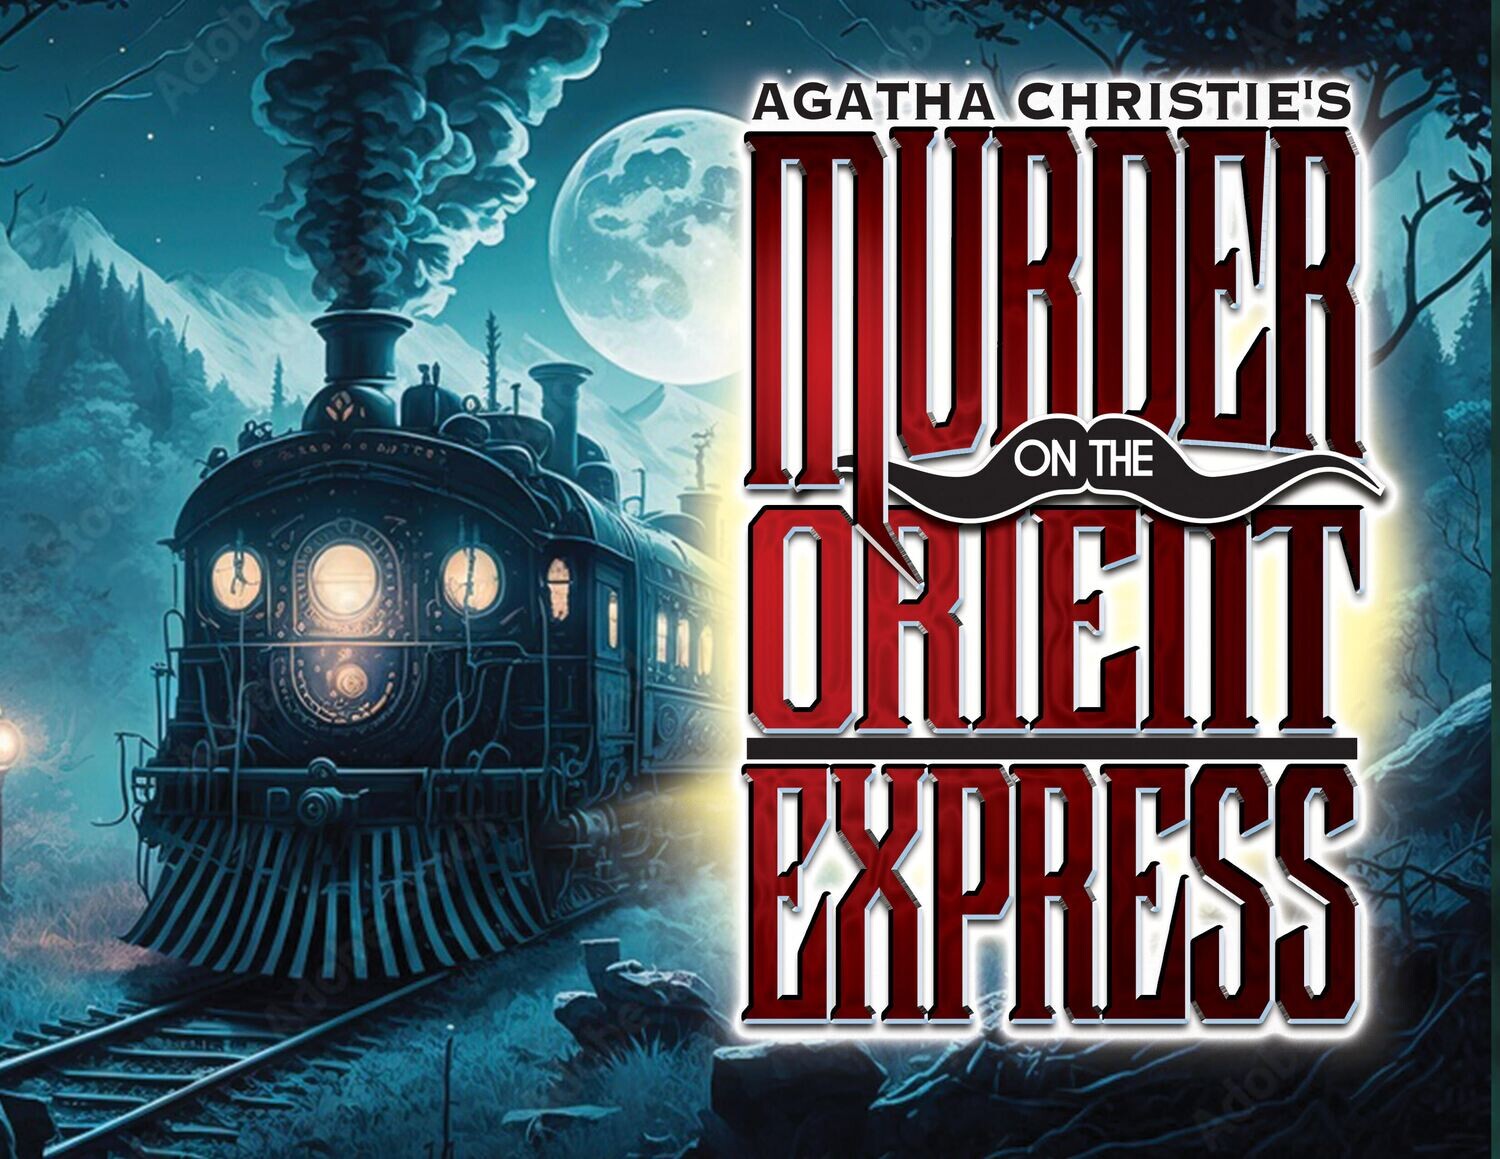 11/17/2023 7:00 pm Friday
Tickets for Agatha Christie's Murder on the Orient Express